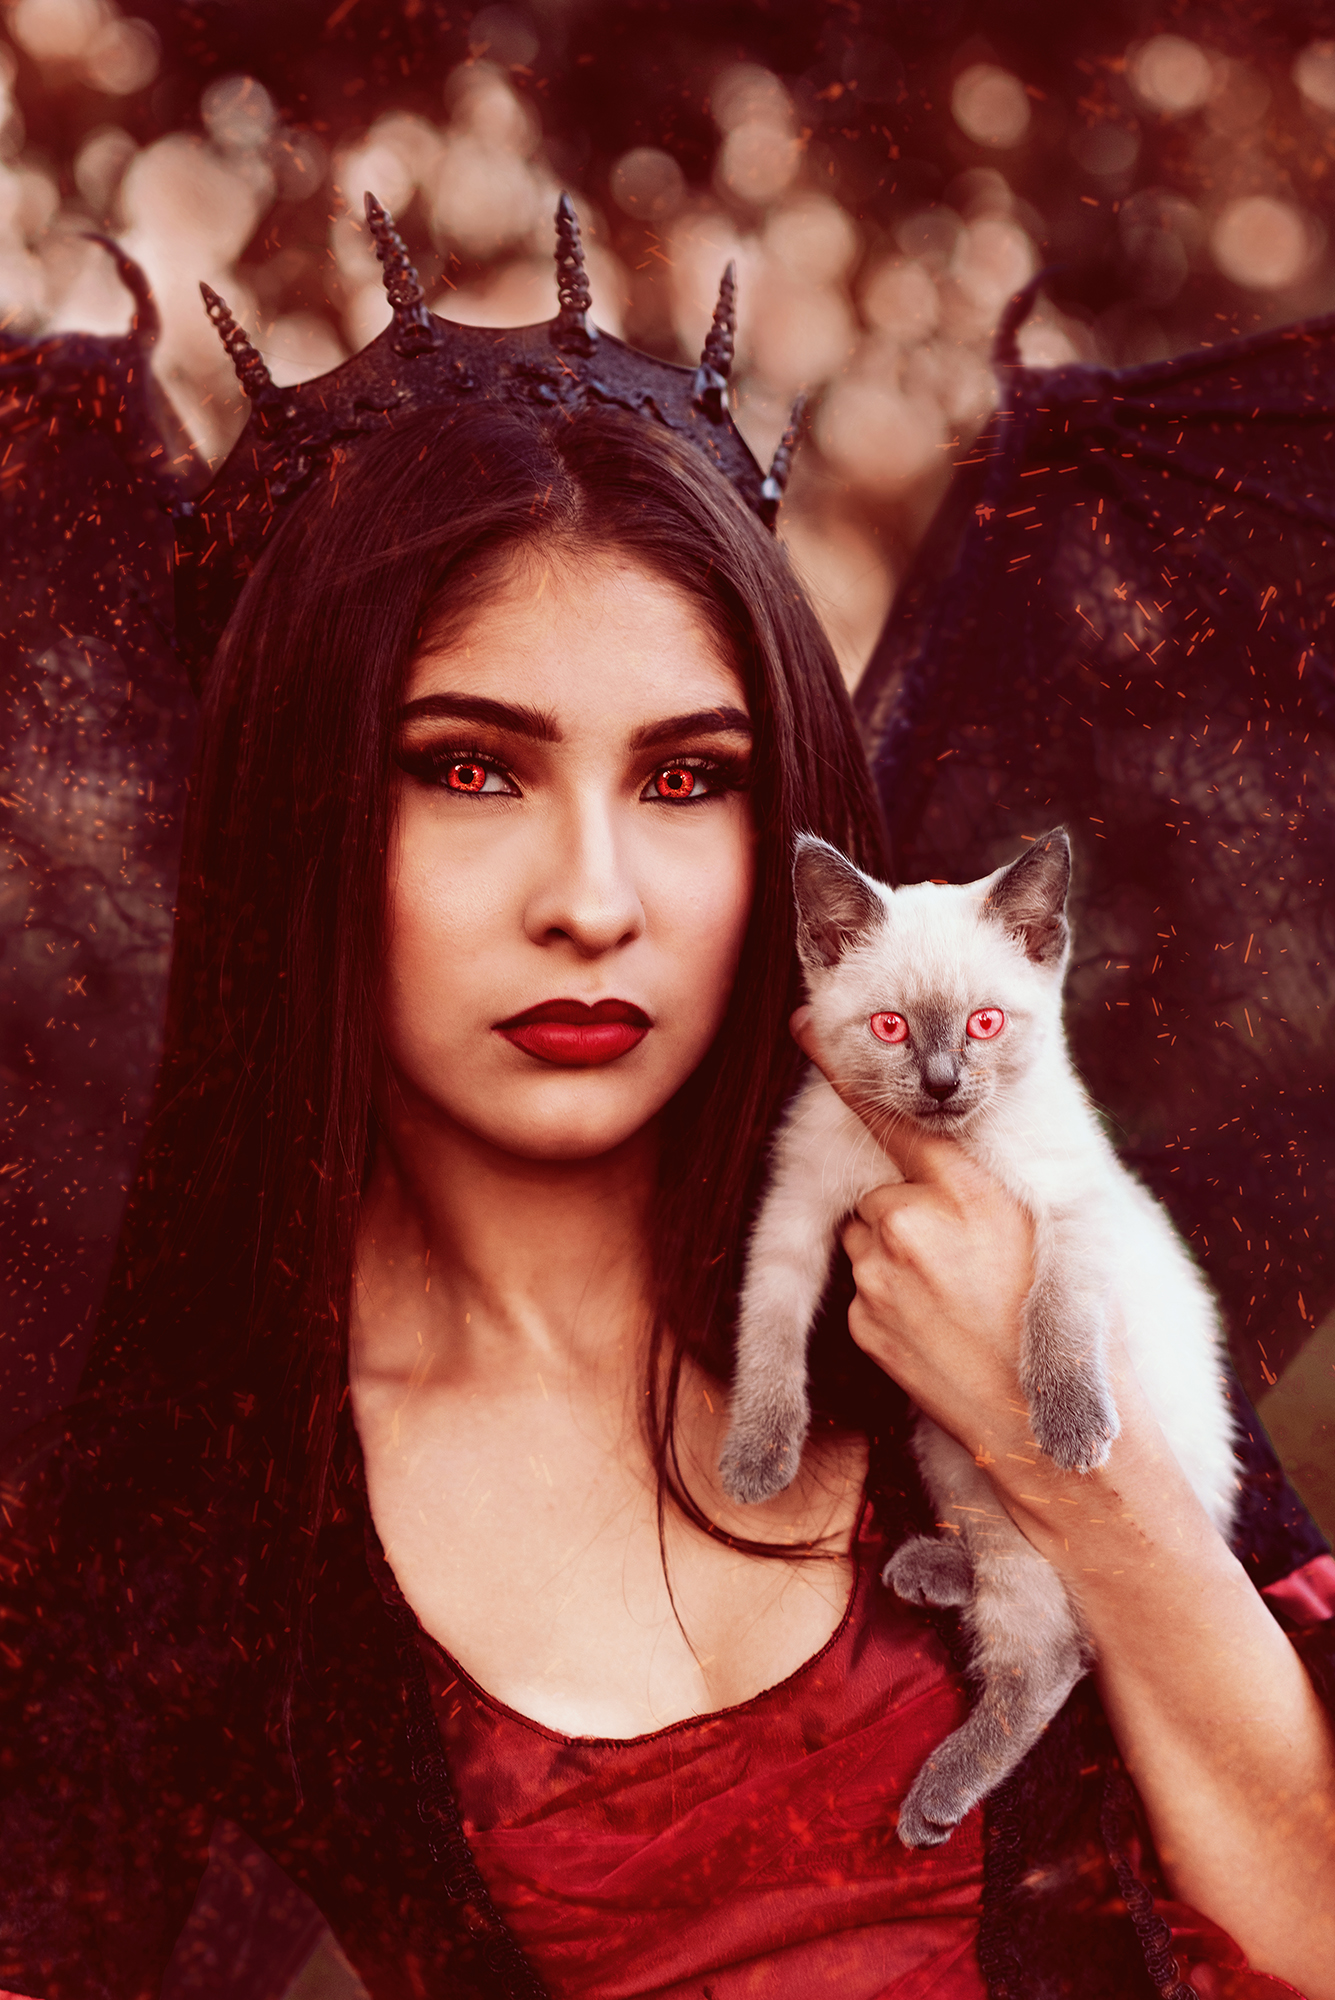 A demonic looking young roman with red eyes and a black crown holds a white and gray kitten with similar red eyes for a fantasy photo shoot by Kendra Colleen Photography in Denver Colorado